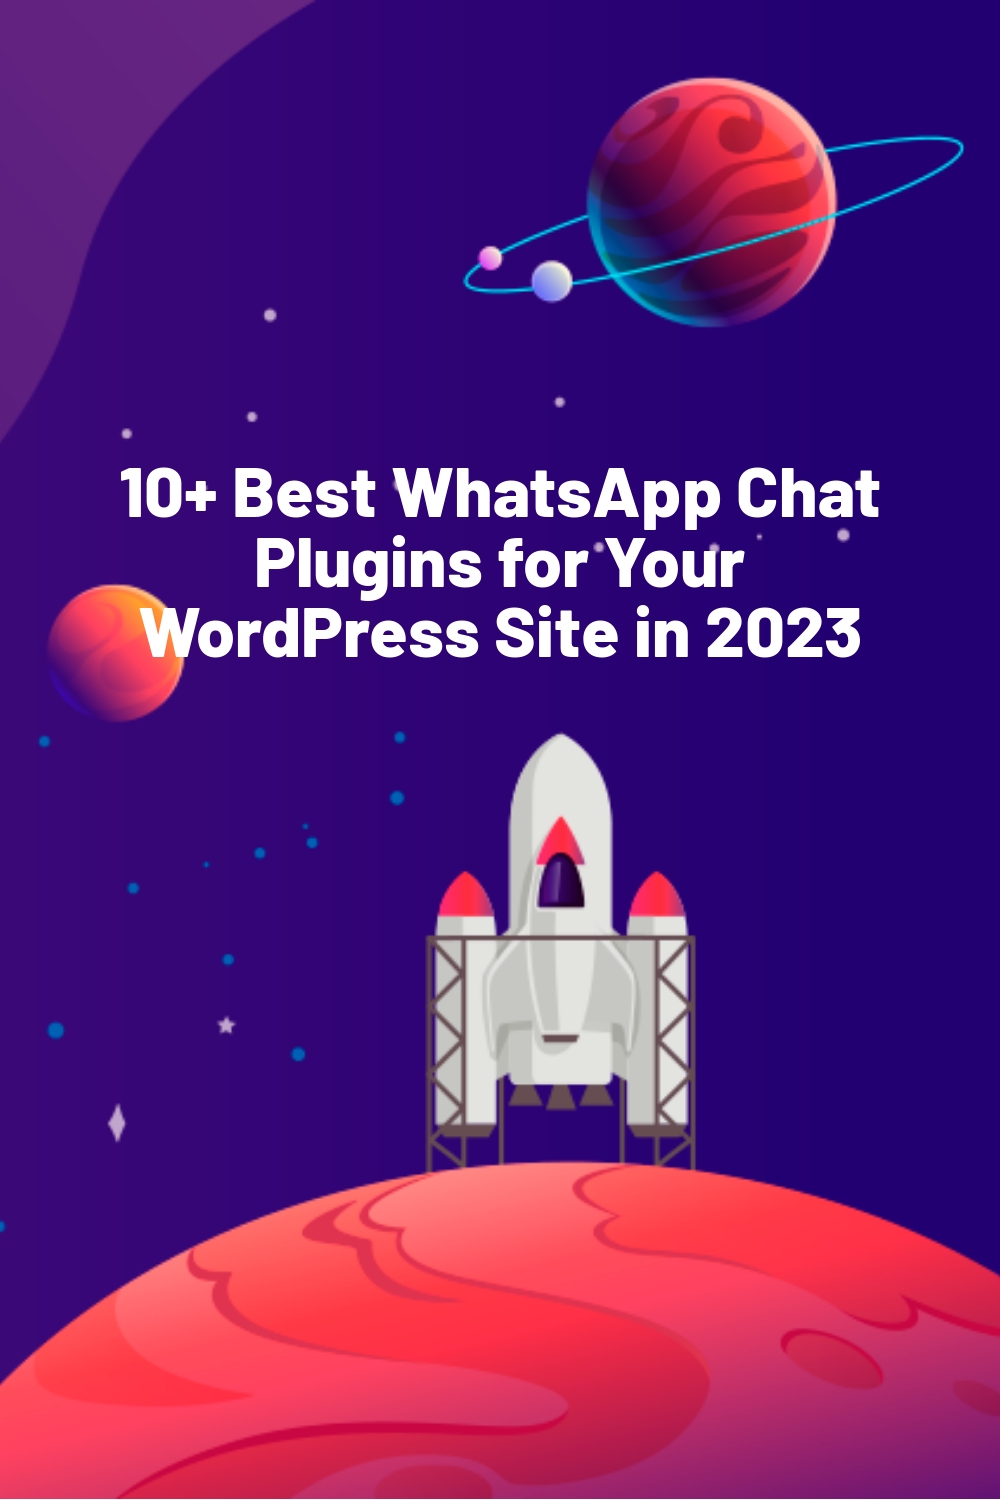 10+ Best WhatsApp Chat Plugins for Your WordPress Site in 2023